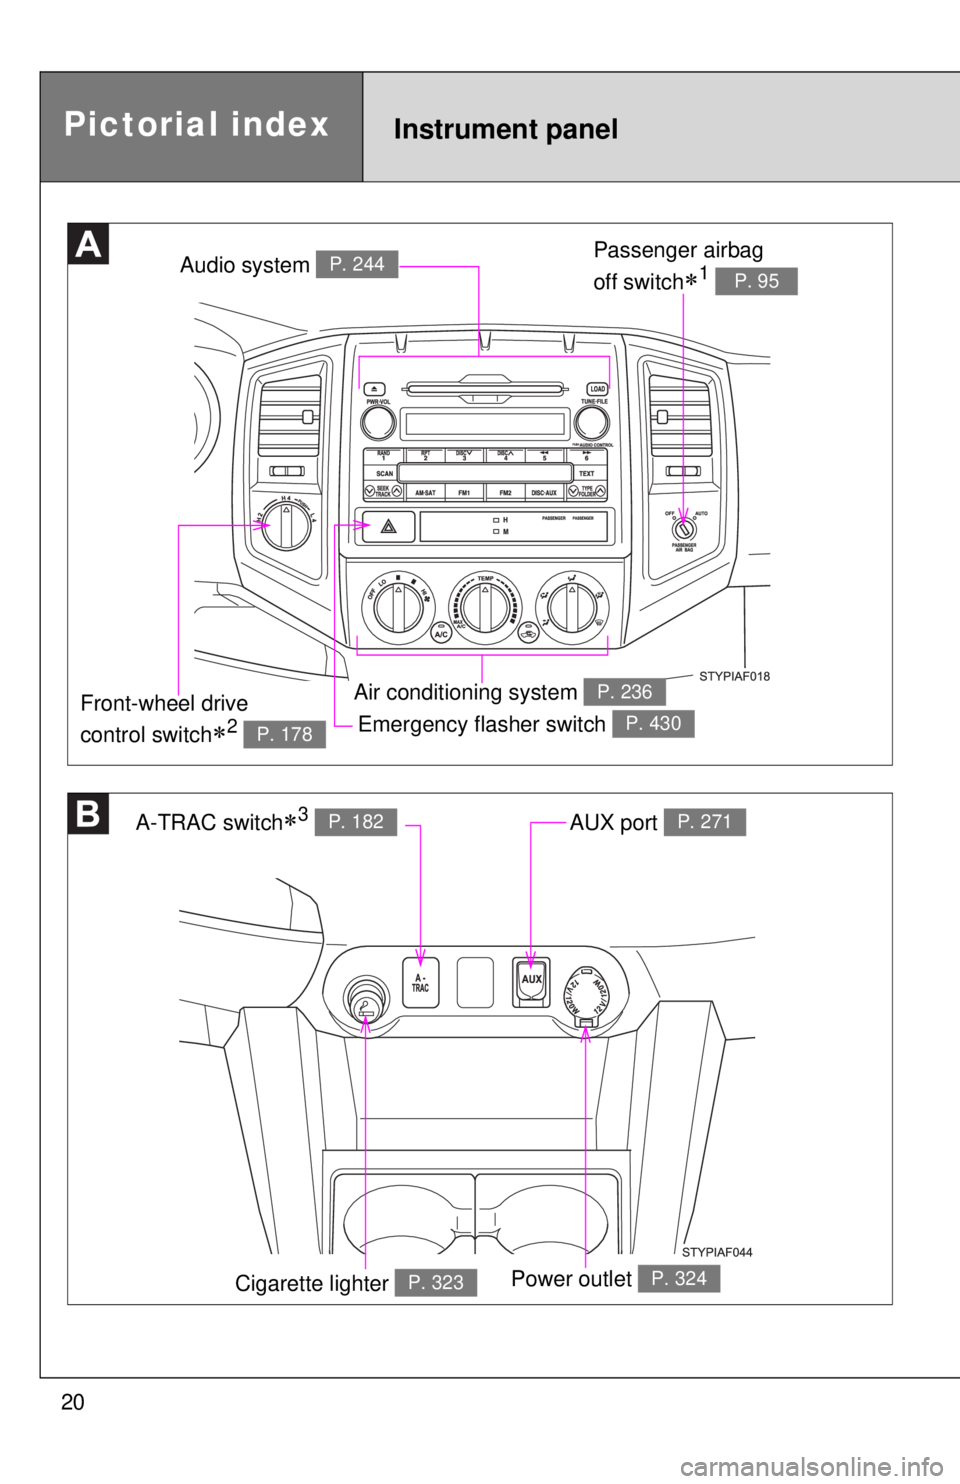 TOYOTA TACOMA 2011  Owners Manual (in English) 20
Emergency flasher switch P. 430
Audio system P. 244
Air conditioning system P. 236
A-TRAC switch3 P. 182AUX port P. 271
Power outlet P. 324
Passenger airbag 
off switch
1 P. 95
Front-wheel dr